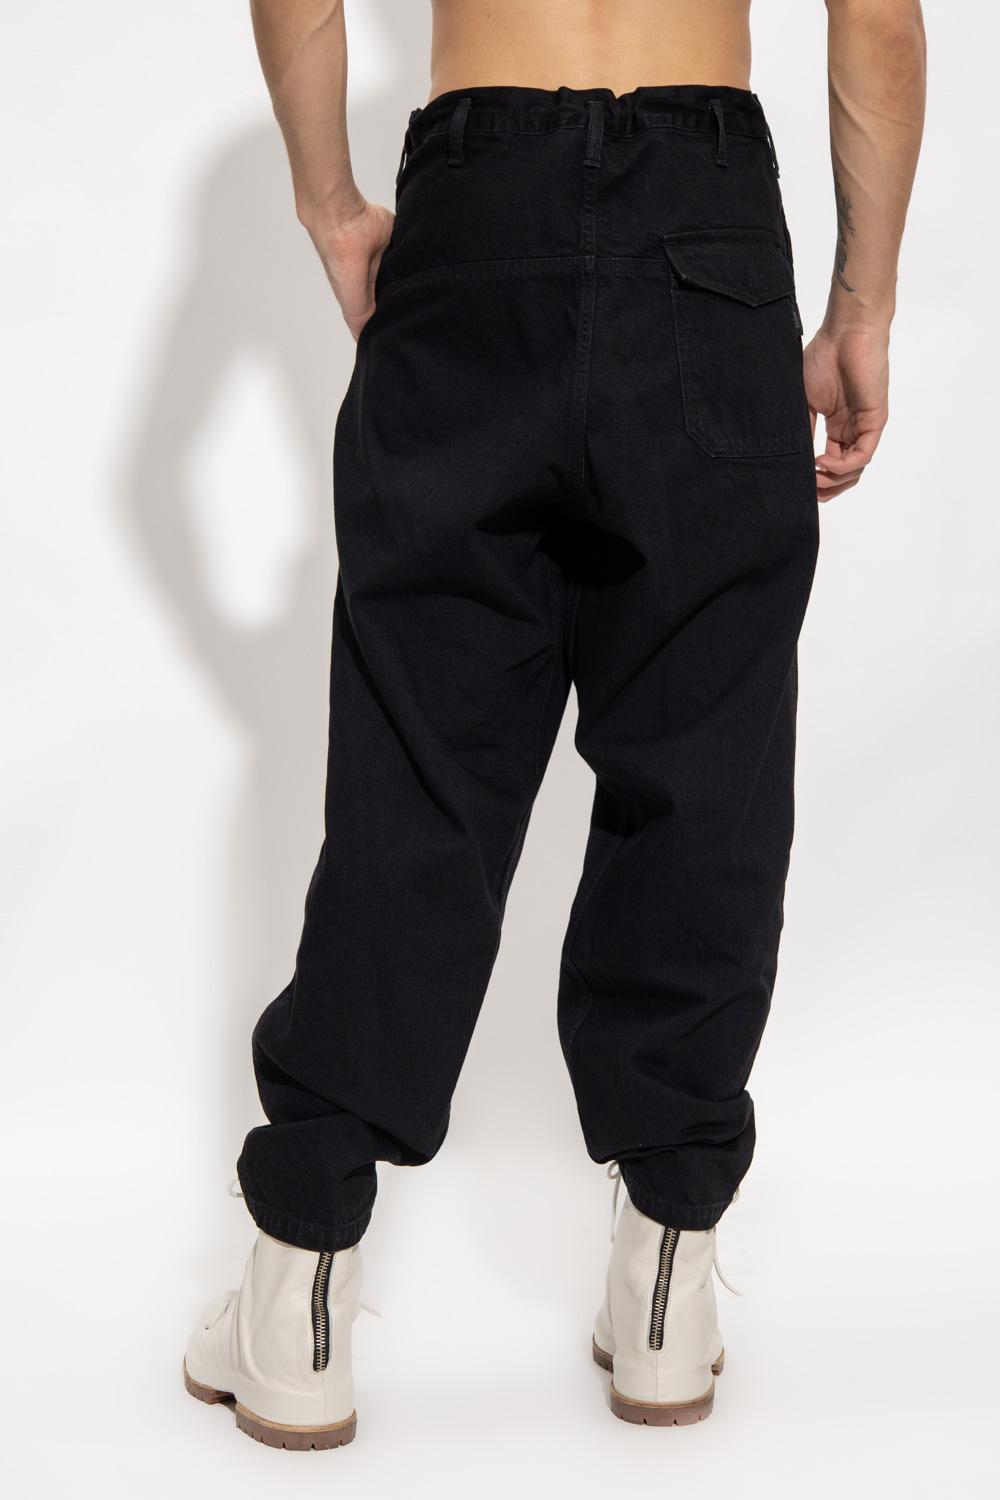 Yohji Yamamoto Jeans With Multiple Pockets in Black for Men | Lyst